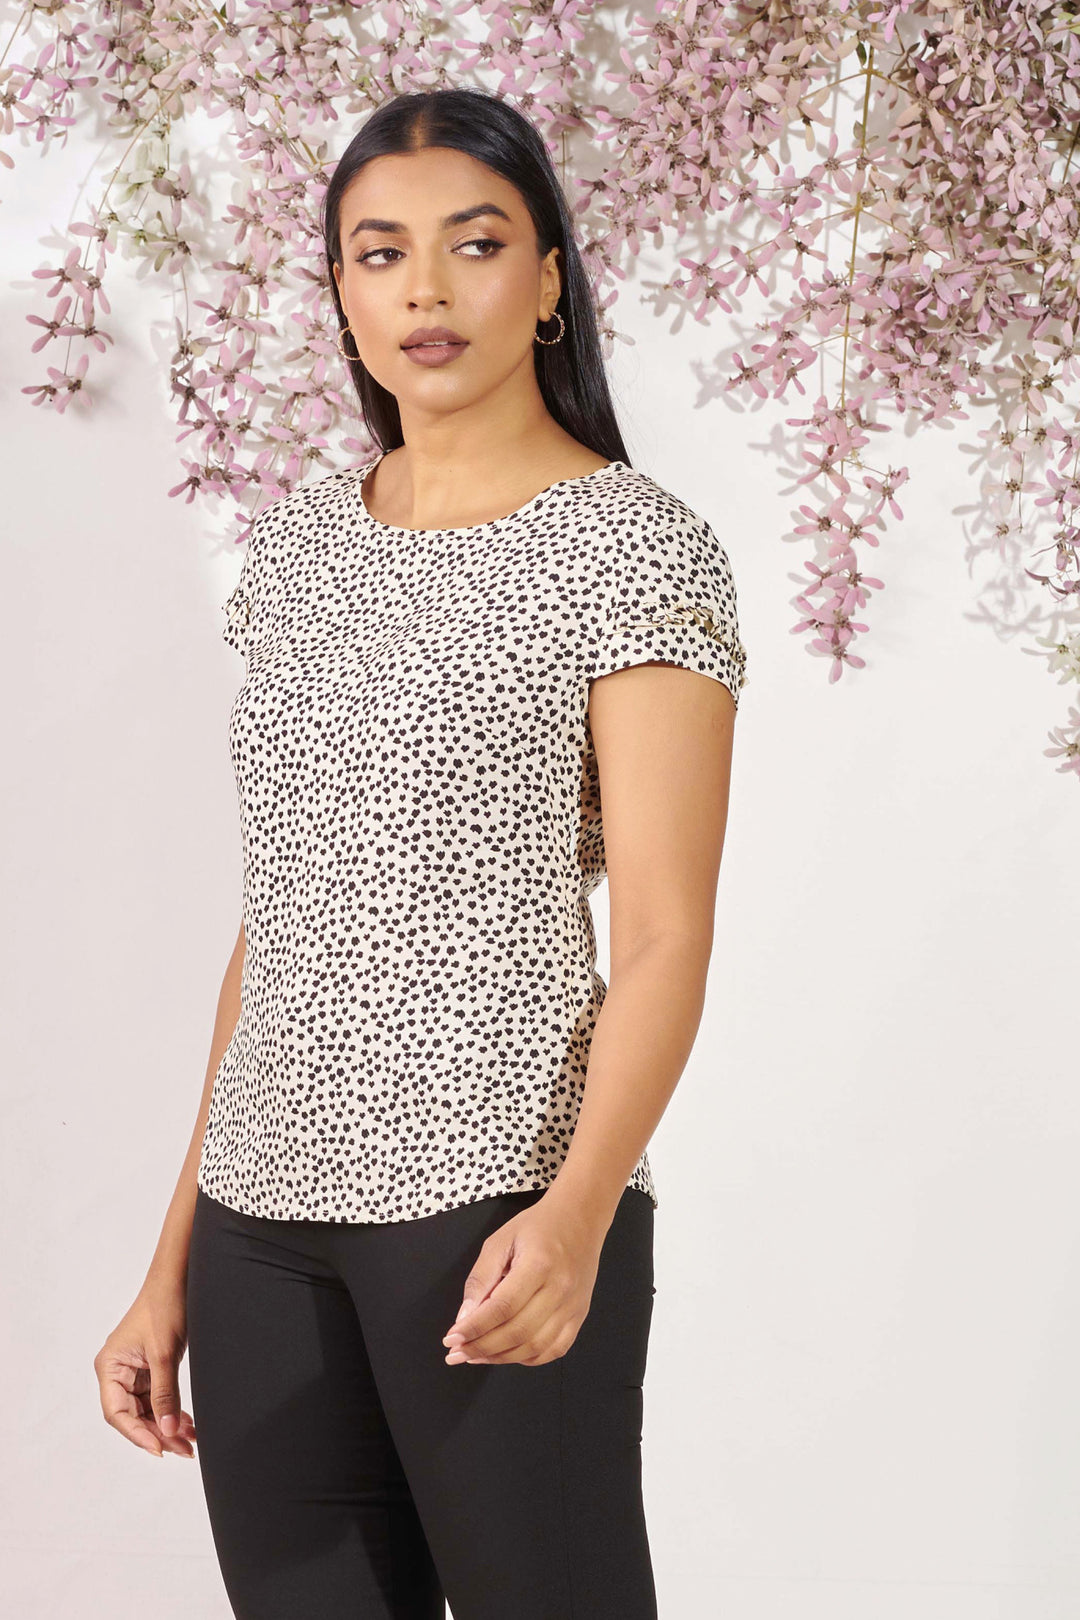 Polka Dot Round Neck Top - Slim Fit, Top, New Arrivals, Office Tops, Round Neck, SH21, Short Sleeves, Smart Casual, Smart Casual Top, Work Top, workwear - MONDY, Sri Lankan women's clothing o